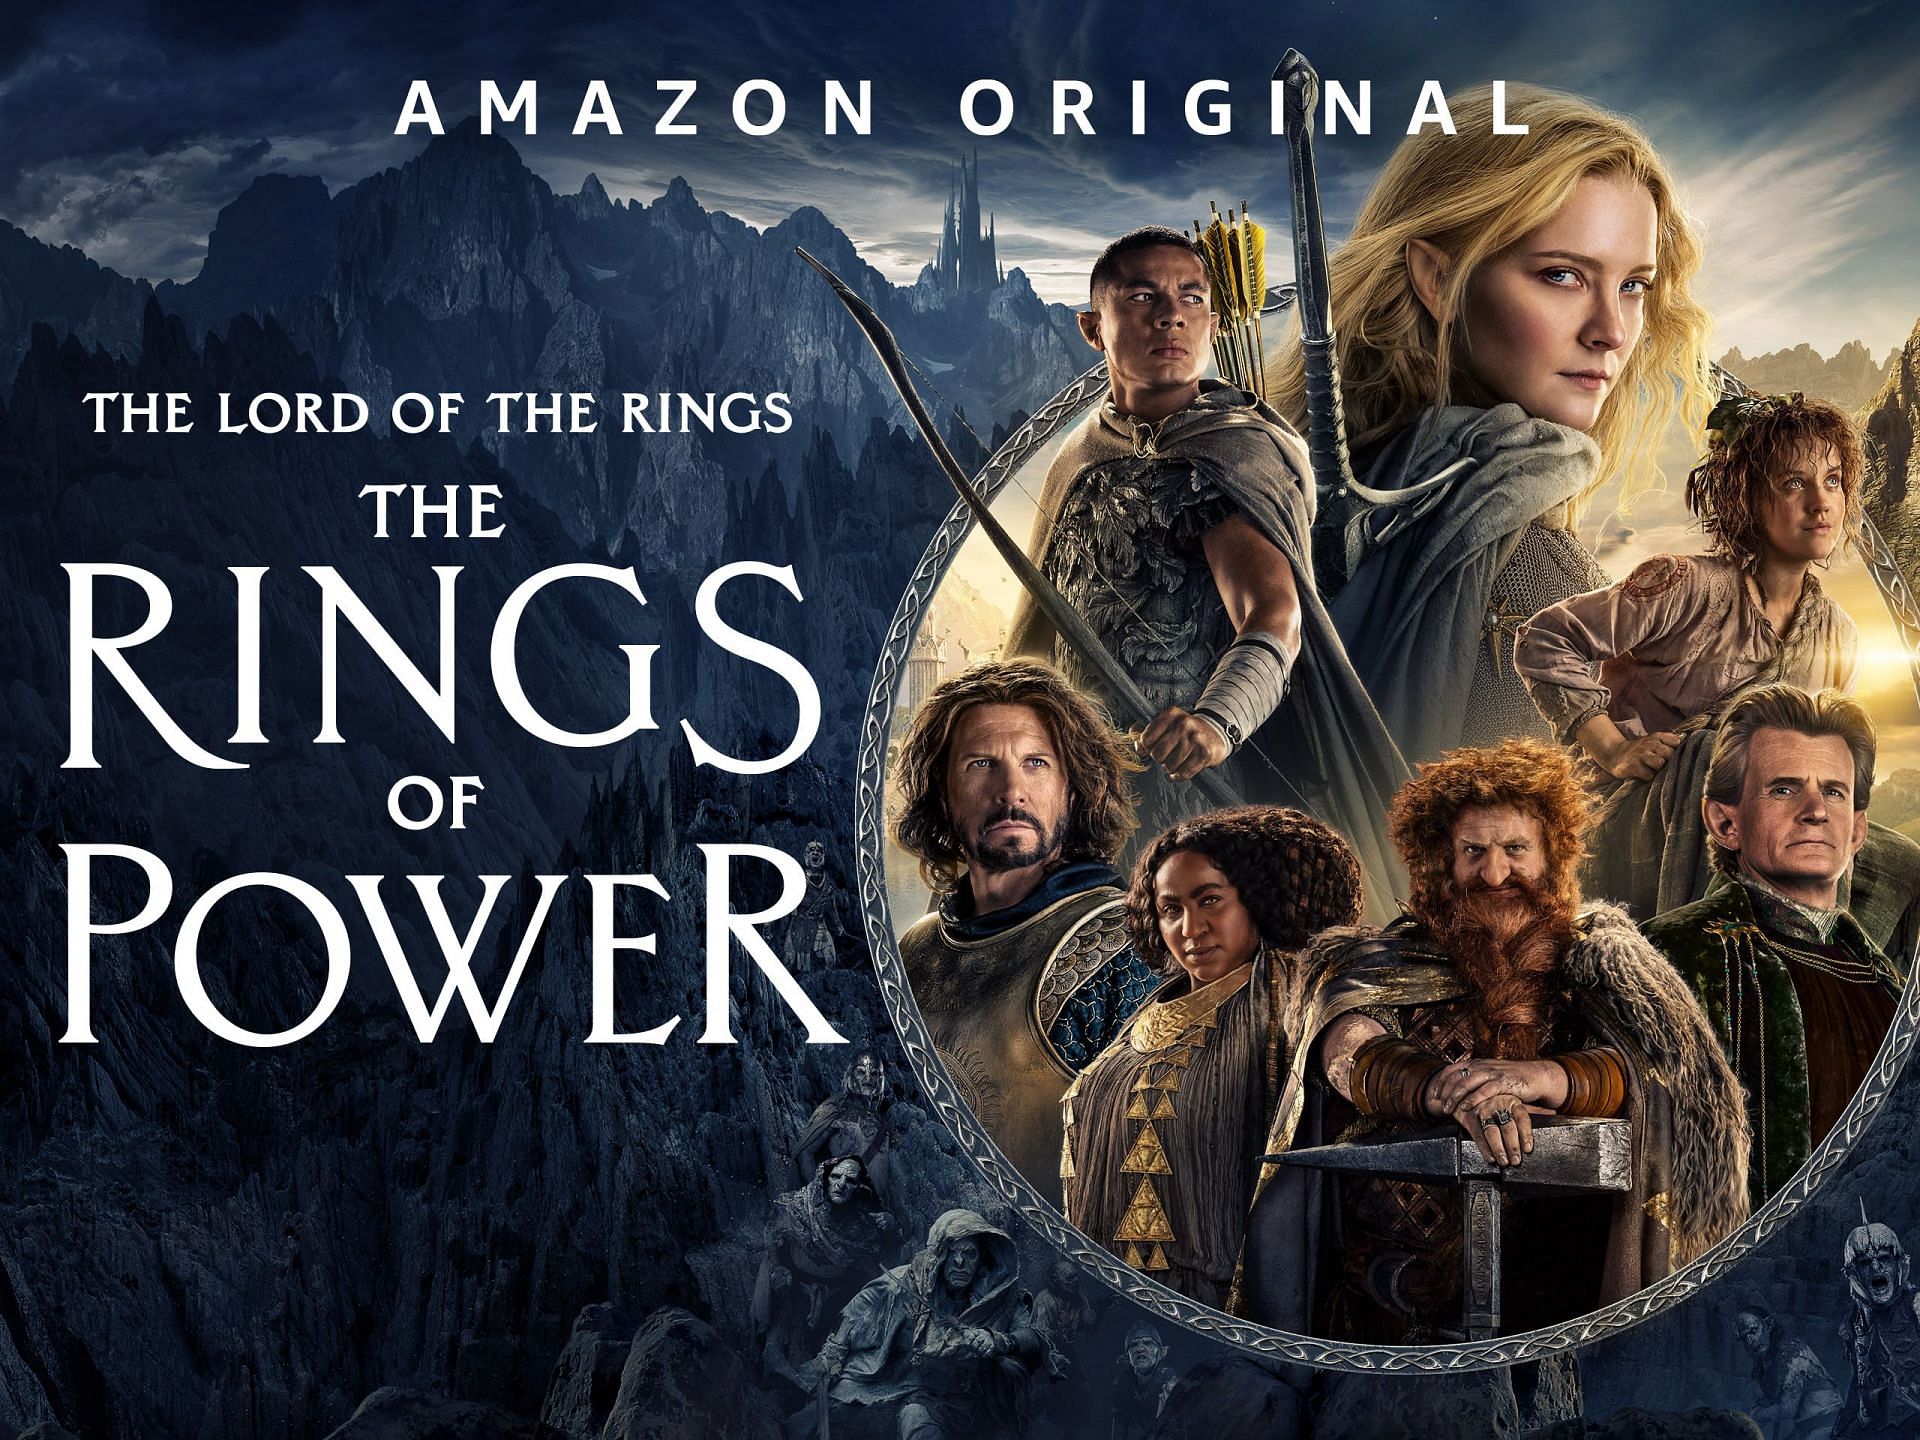 The Lord of the Rings: The Rings of Power (Image via Amazon Studios)